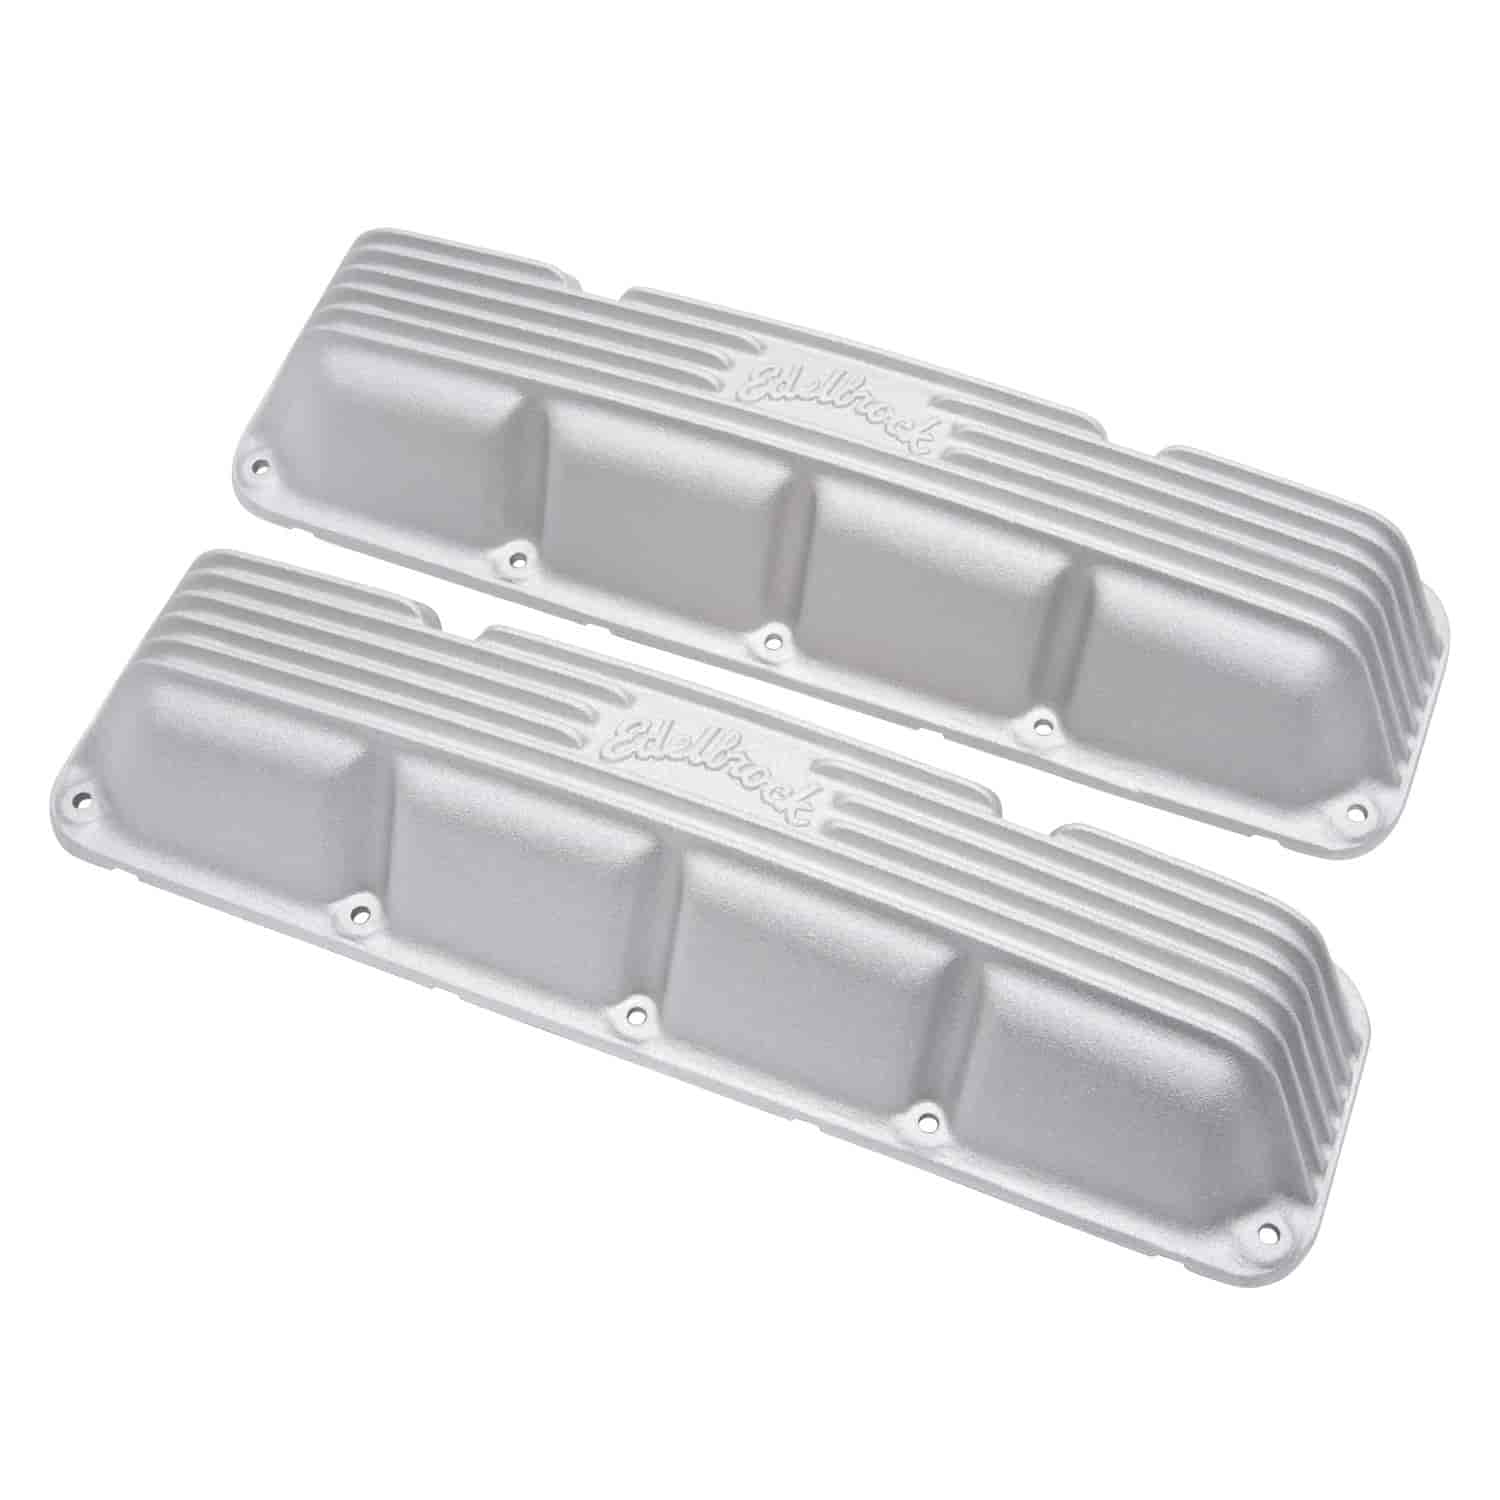 Edelbrock 41999: Classic Finned Valve Covers for 1967-1991 AMC/Jeep 290-401  V8 with Satin Finish JEGS